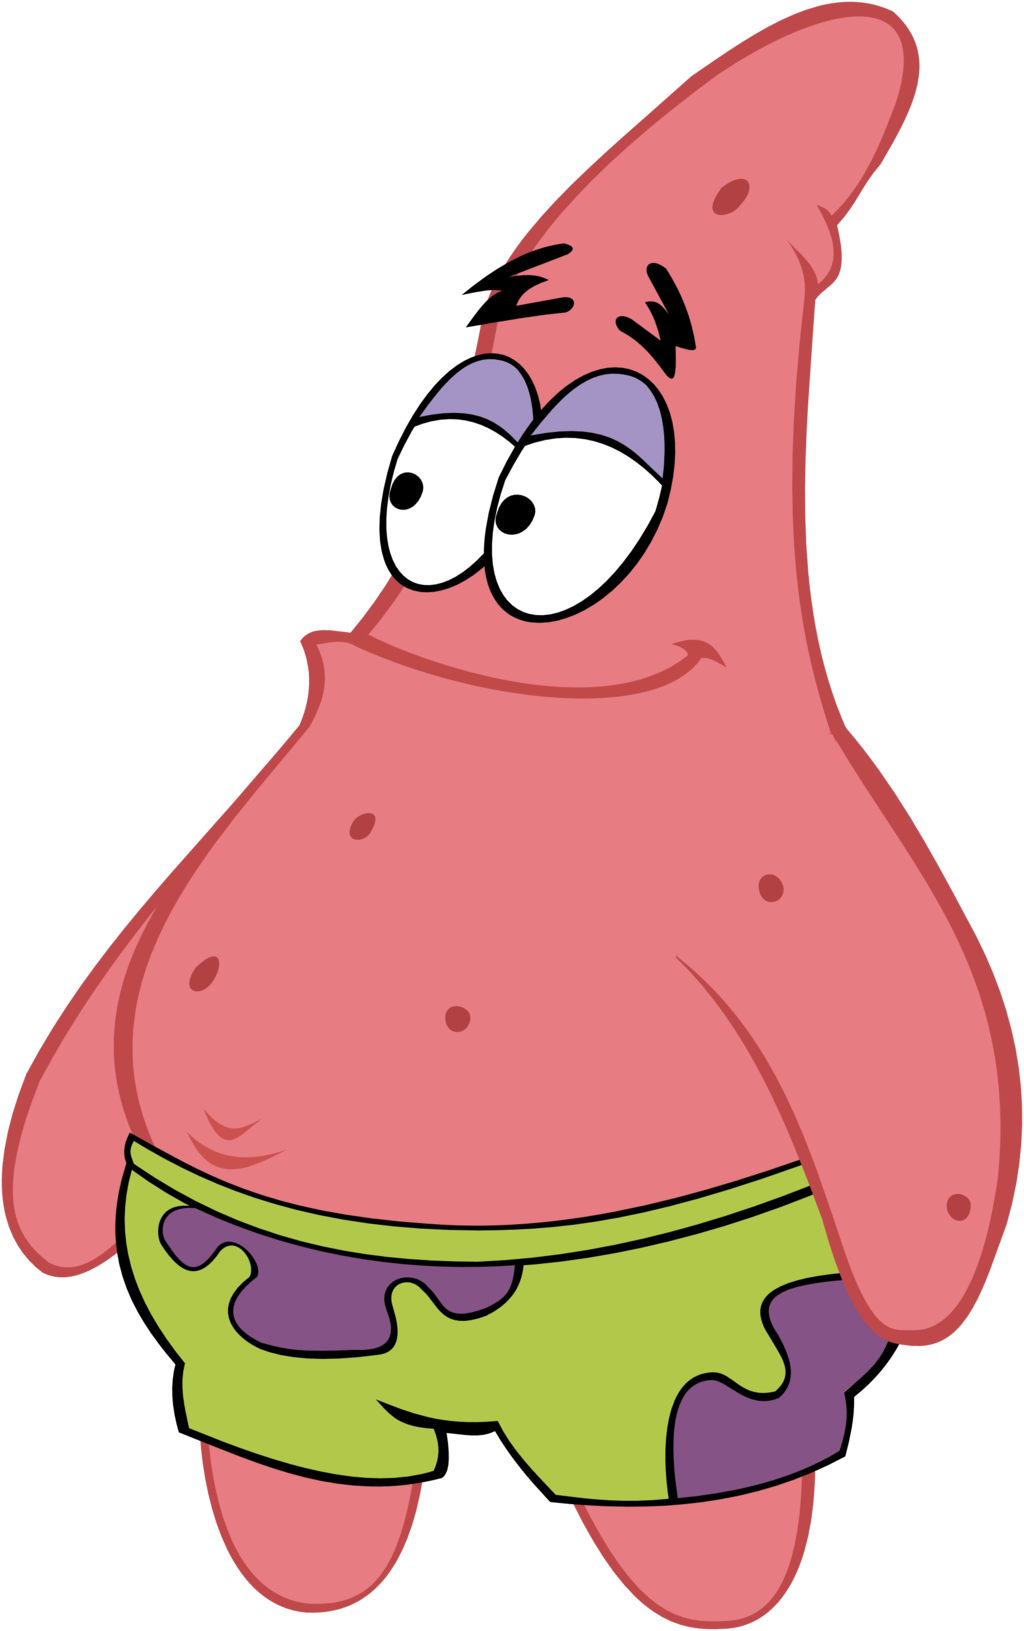 Patrick Star Smiling To The Side